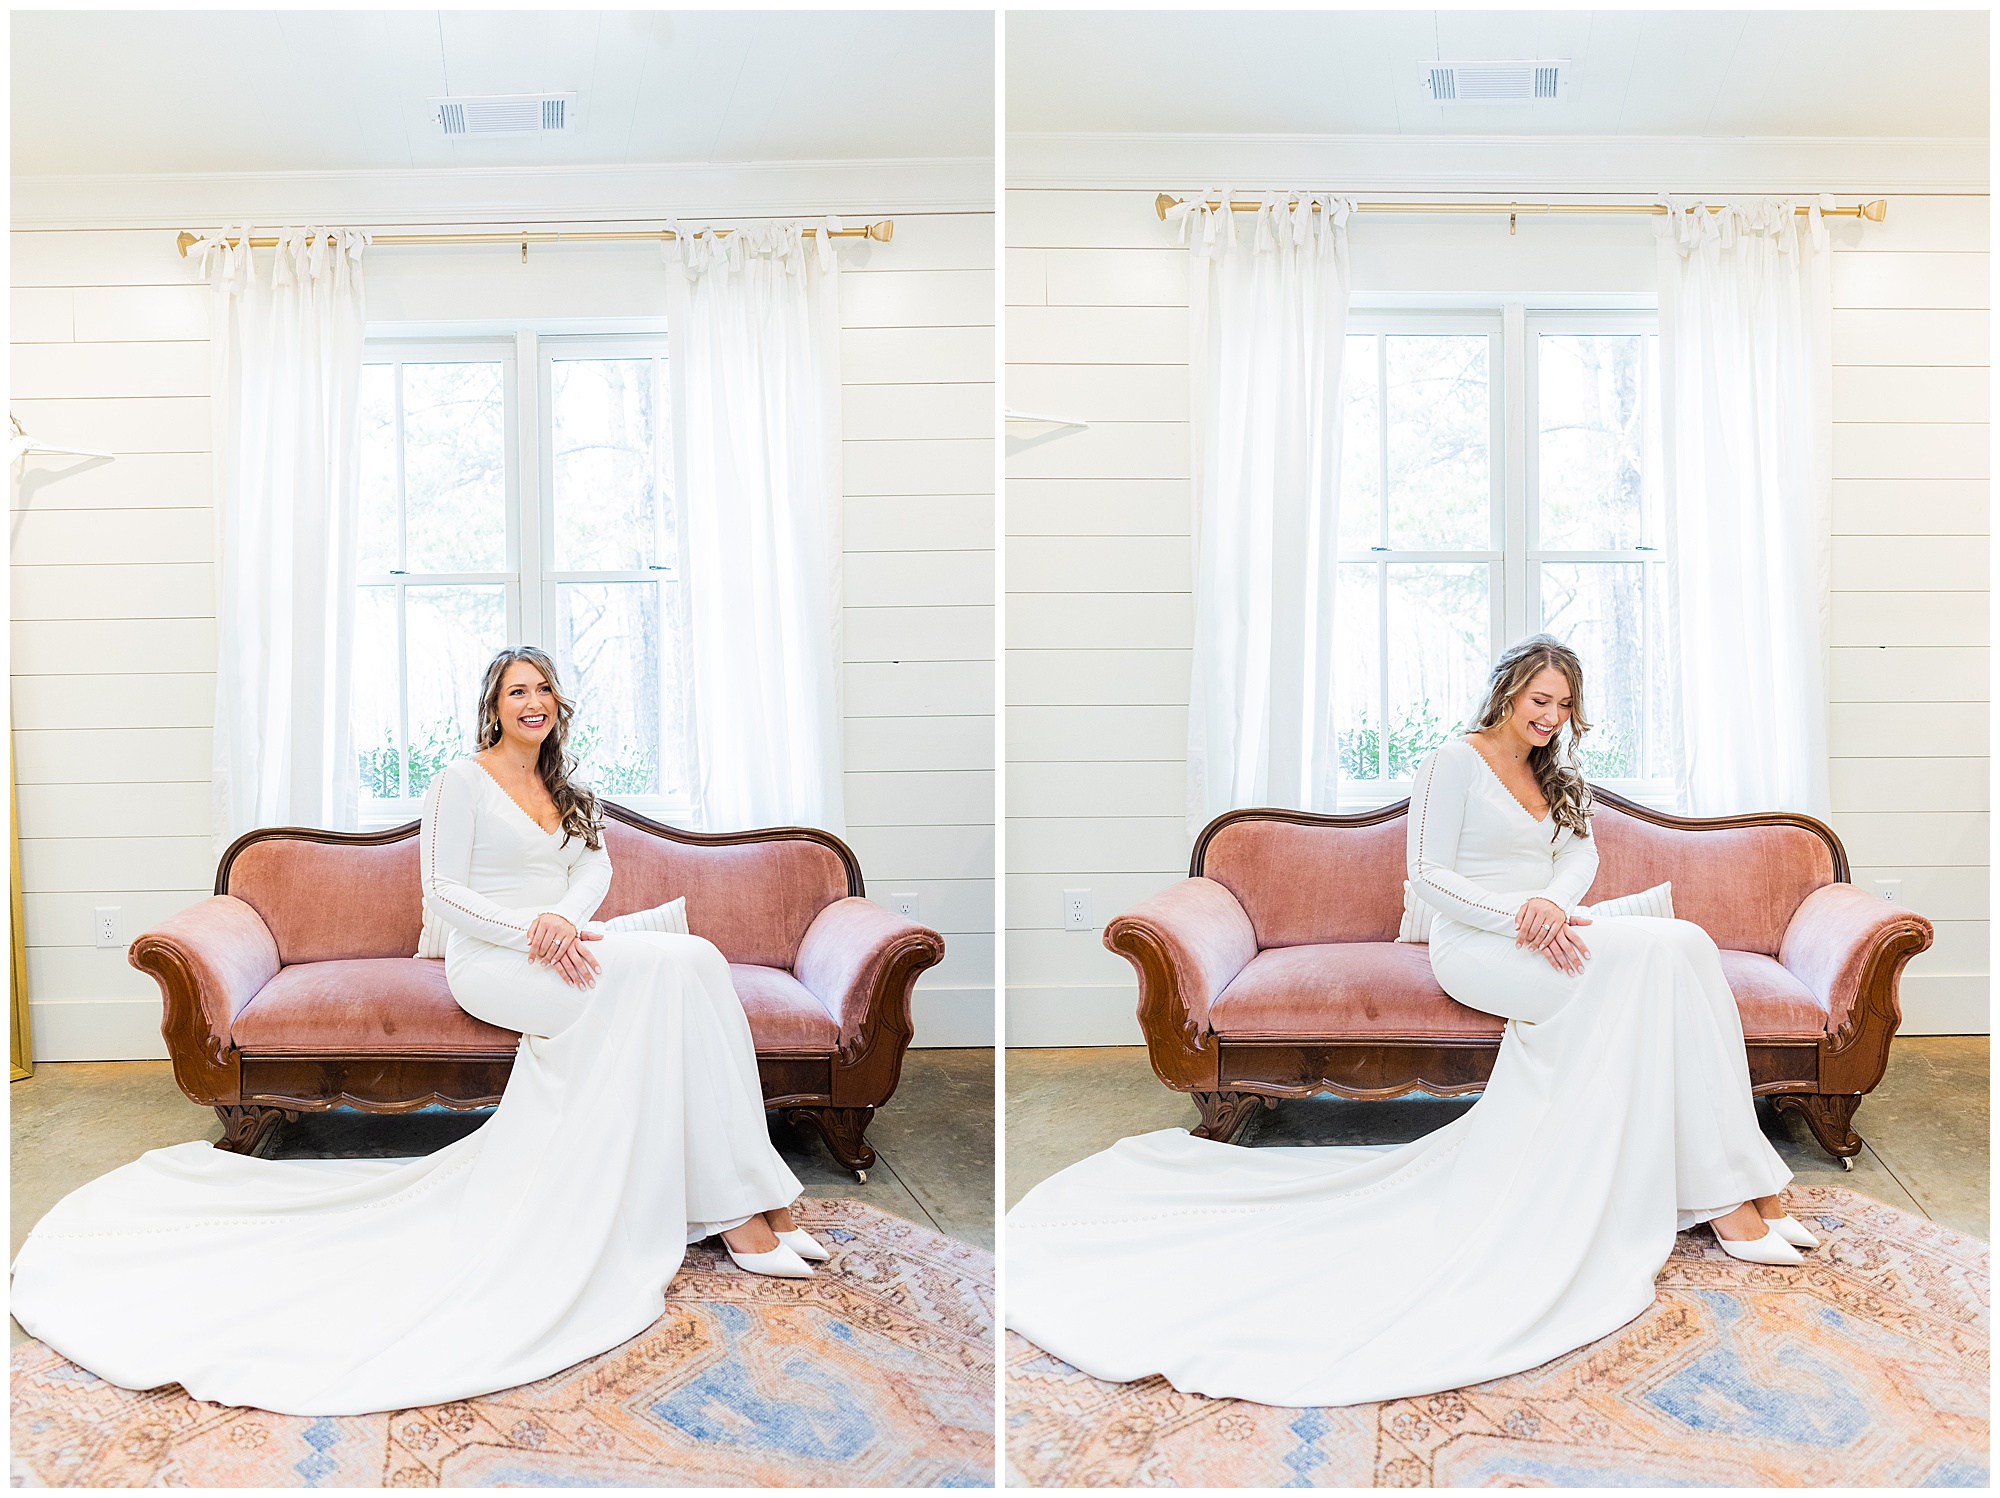 Eleanor Stenner Photography - a Birmingham, Alabama Wedding Photographer - shares bridal fashion trends for the 2023 year.